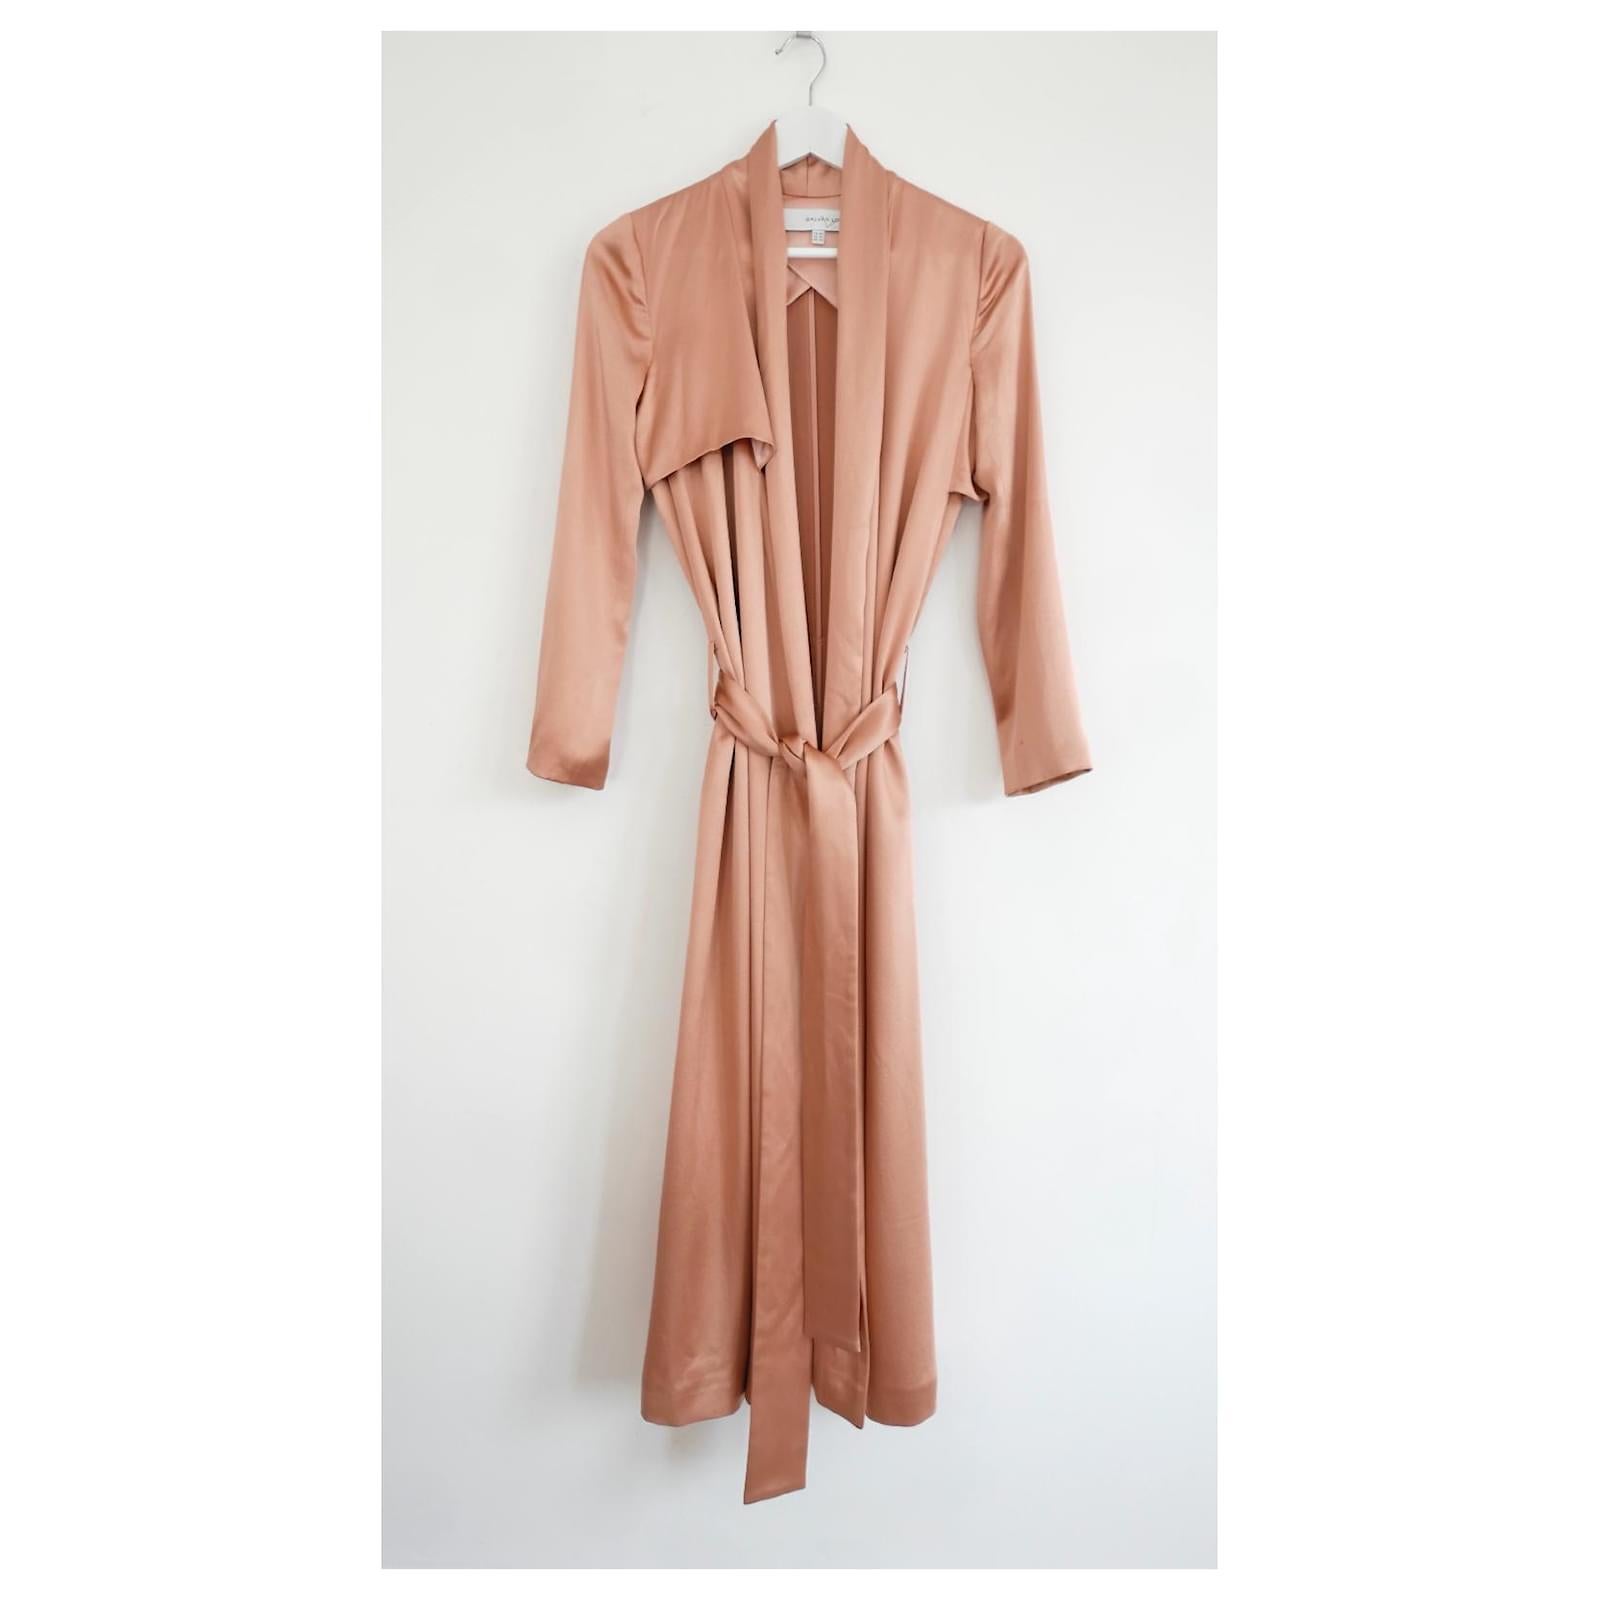 Stunning Galvan satin trench coat. Bought for £1295 and worn a couple of times. 
Made from heavy glossy blush pink silk satin, it has a loose fit with asymmetric yoke detailing and wide belt to fasten at waist. Lined through sleeves and shoulders.